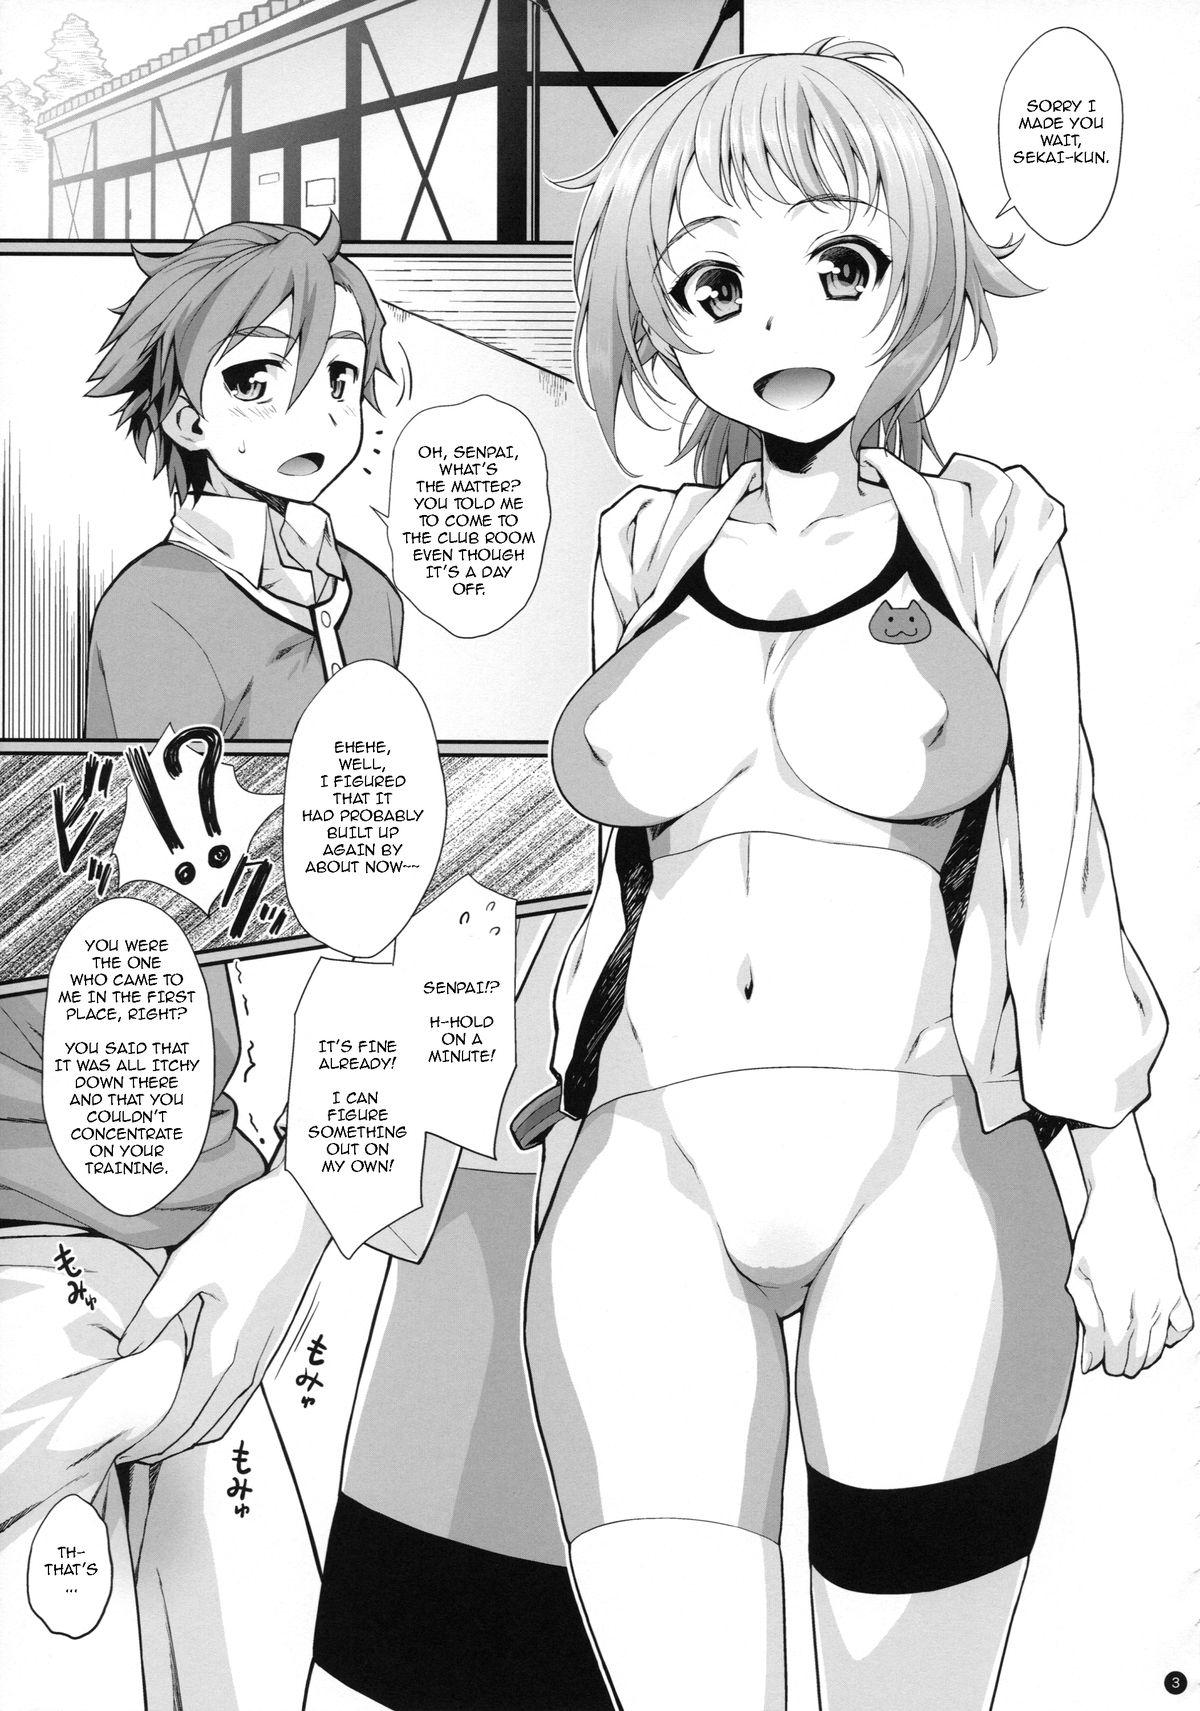 Suck Cock TRY ESCALATION - Gundam build fighters try Duro - Page 5